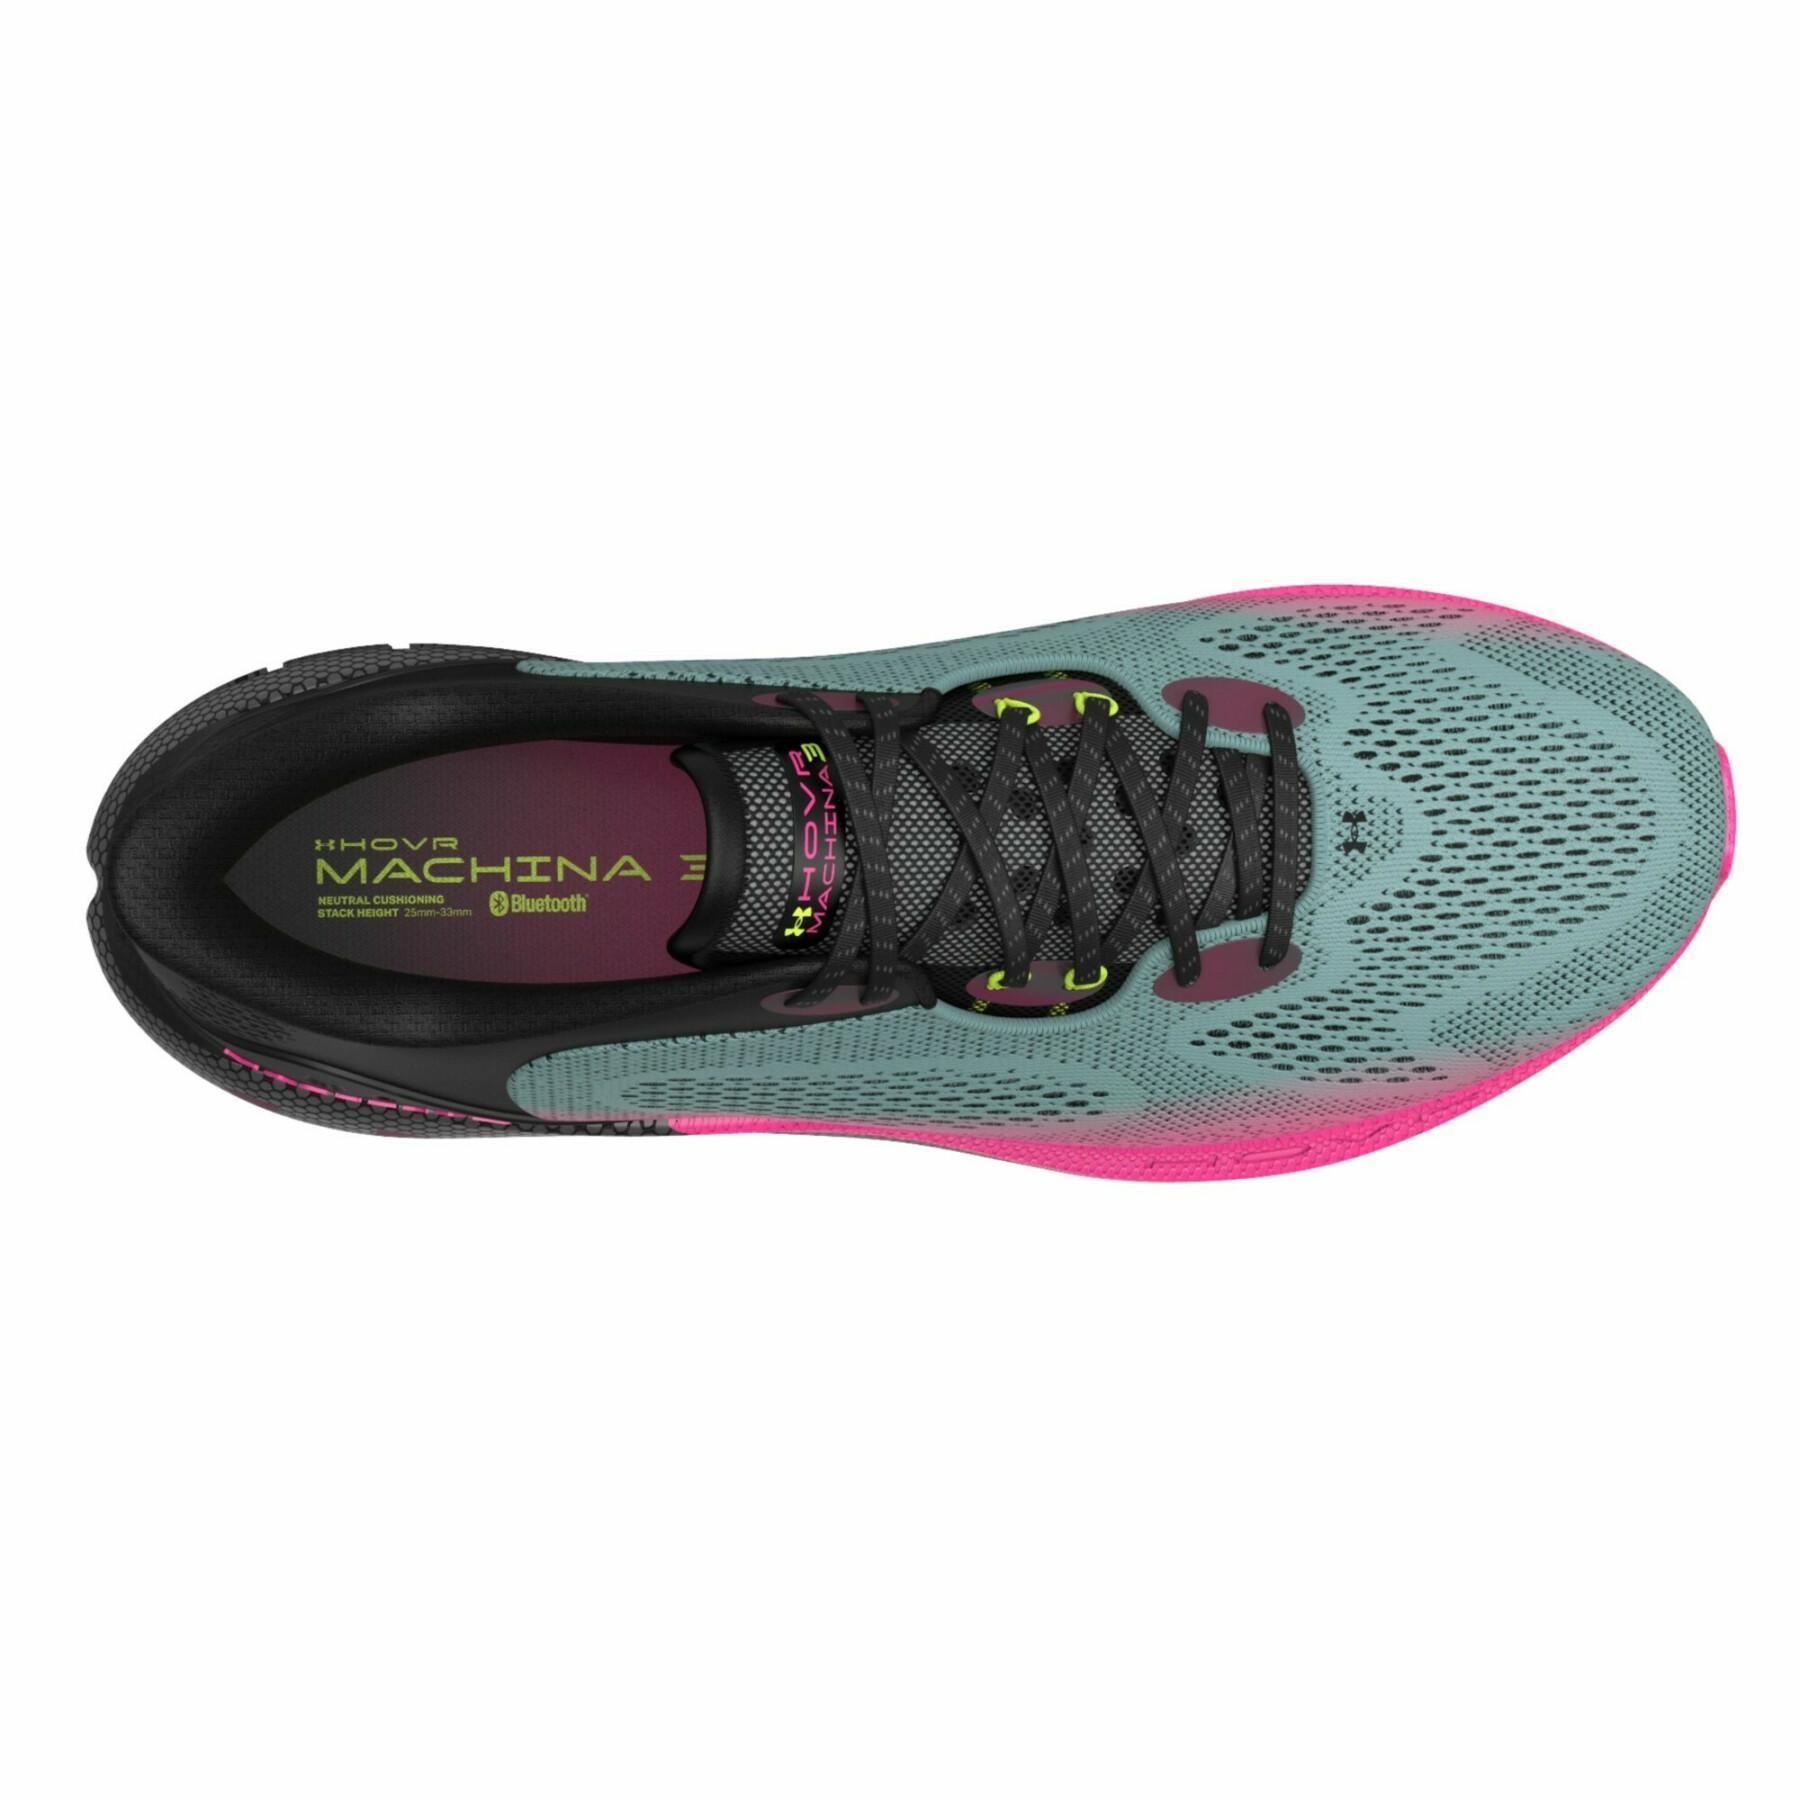 Running shoes Under Armour Hovr machina 3 daylight